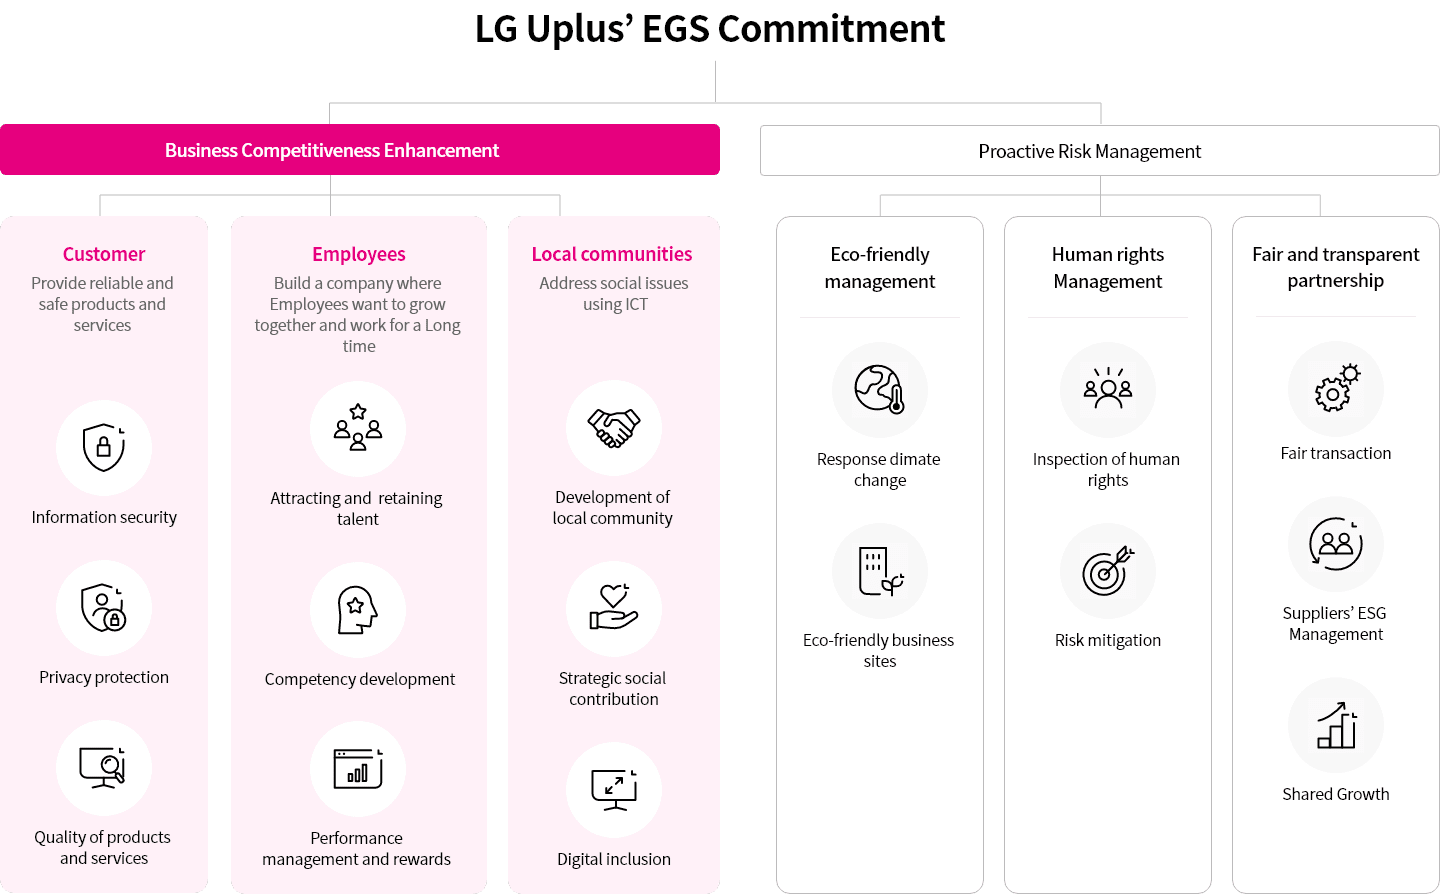 LG Uplus’ EGS Commitment - Business Competitiveness Enhancement, Proactive Risk Management
Customer : Provide reliable and safe products and services, Information security, Privacy protection, Quality of products and services
Employees : Build a company where Employees want to grow together and work for a Long time, Attracting and retaining talent,Competency development,Performance management and rewards 
Local communities :  Address social issues using ICT, Development of local community, Strategic social contribution, Digital inclusion
Proactive Risk Management
Eco-friendly management : Response dimate change, Eco-friendly business sites
Human rights Management :Inspection of human rights, Risk mitigation
Fair and transparent partnership : Fair transaction, Suppliers’ ESG Management, Shared Growth